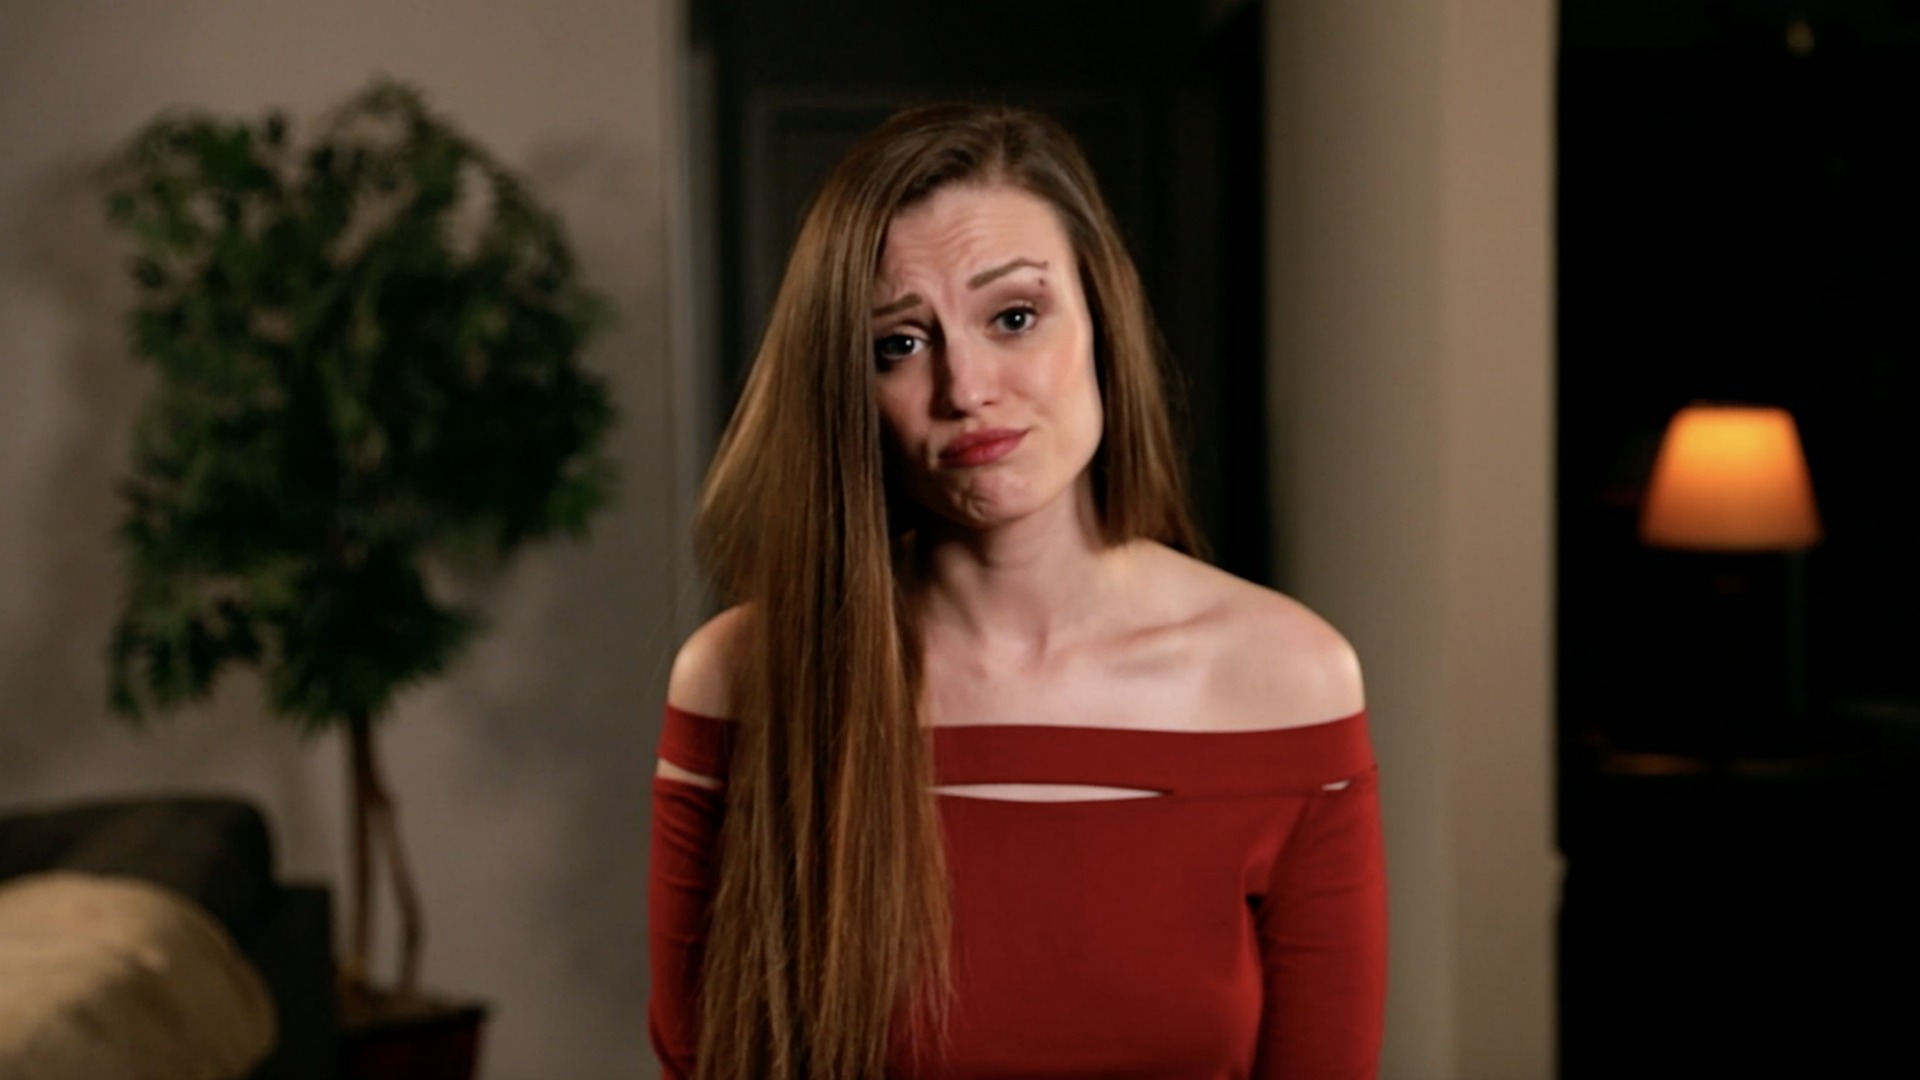 Watch Overheard: 'I Don't Like Monogamy' | Love After Lockup Video Extras